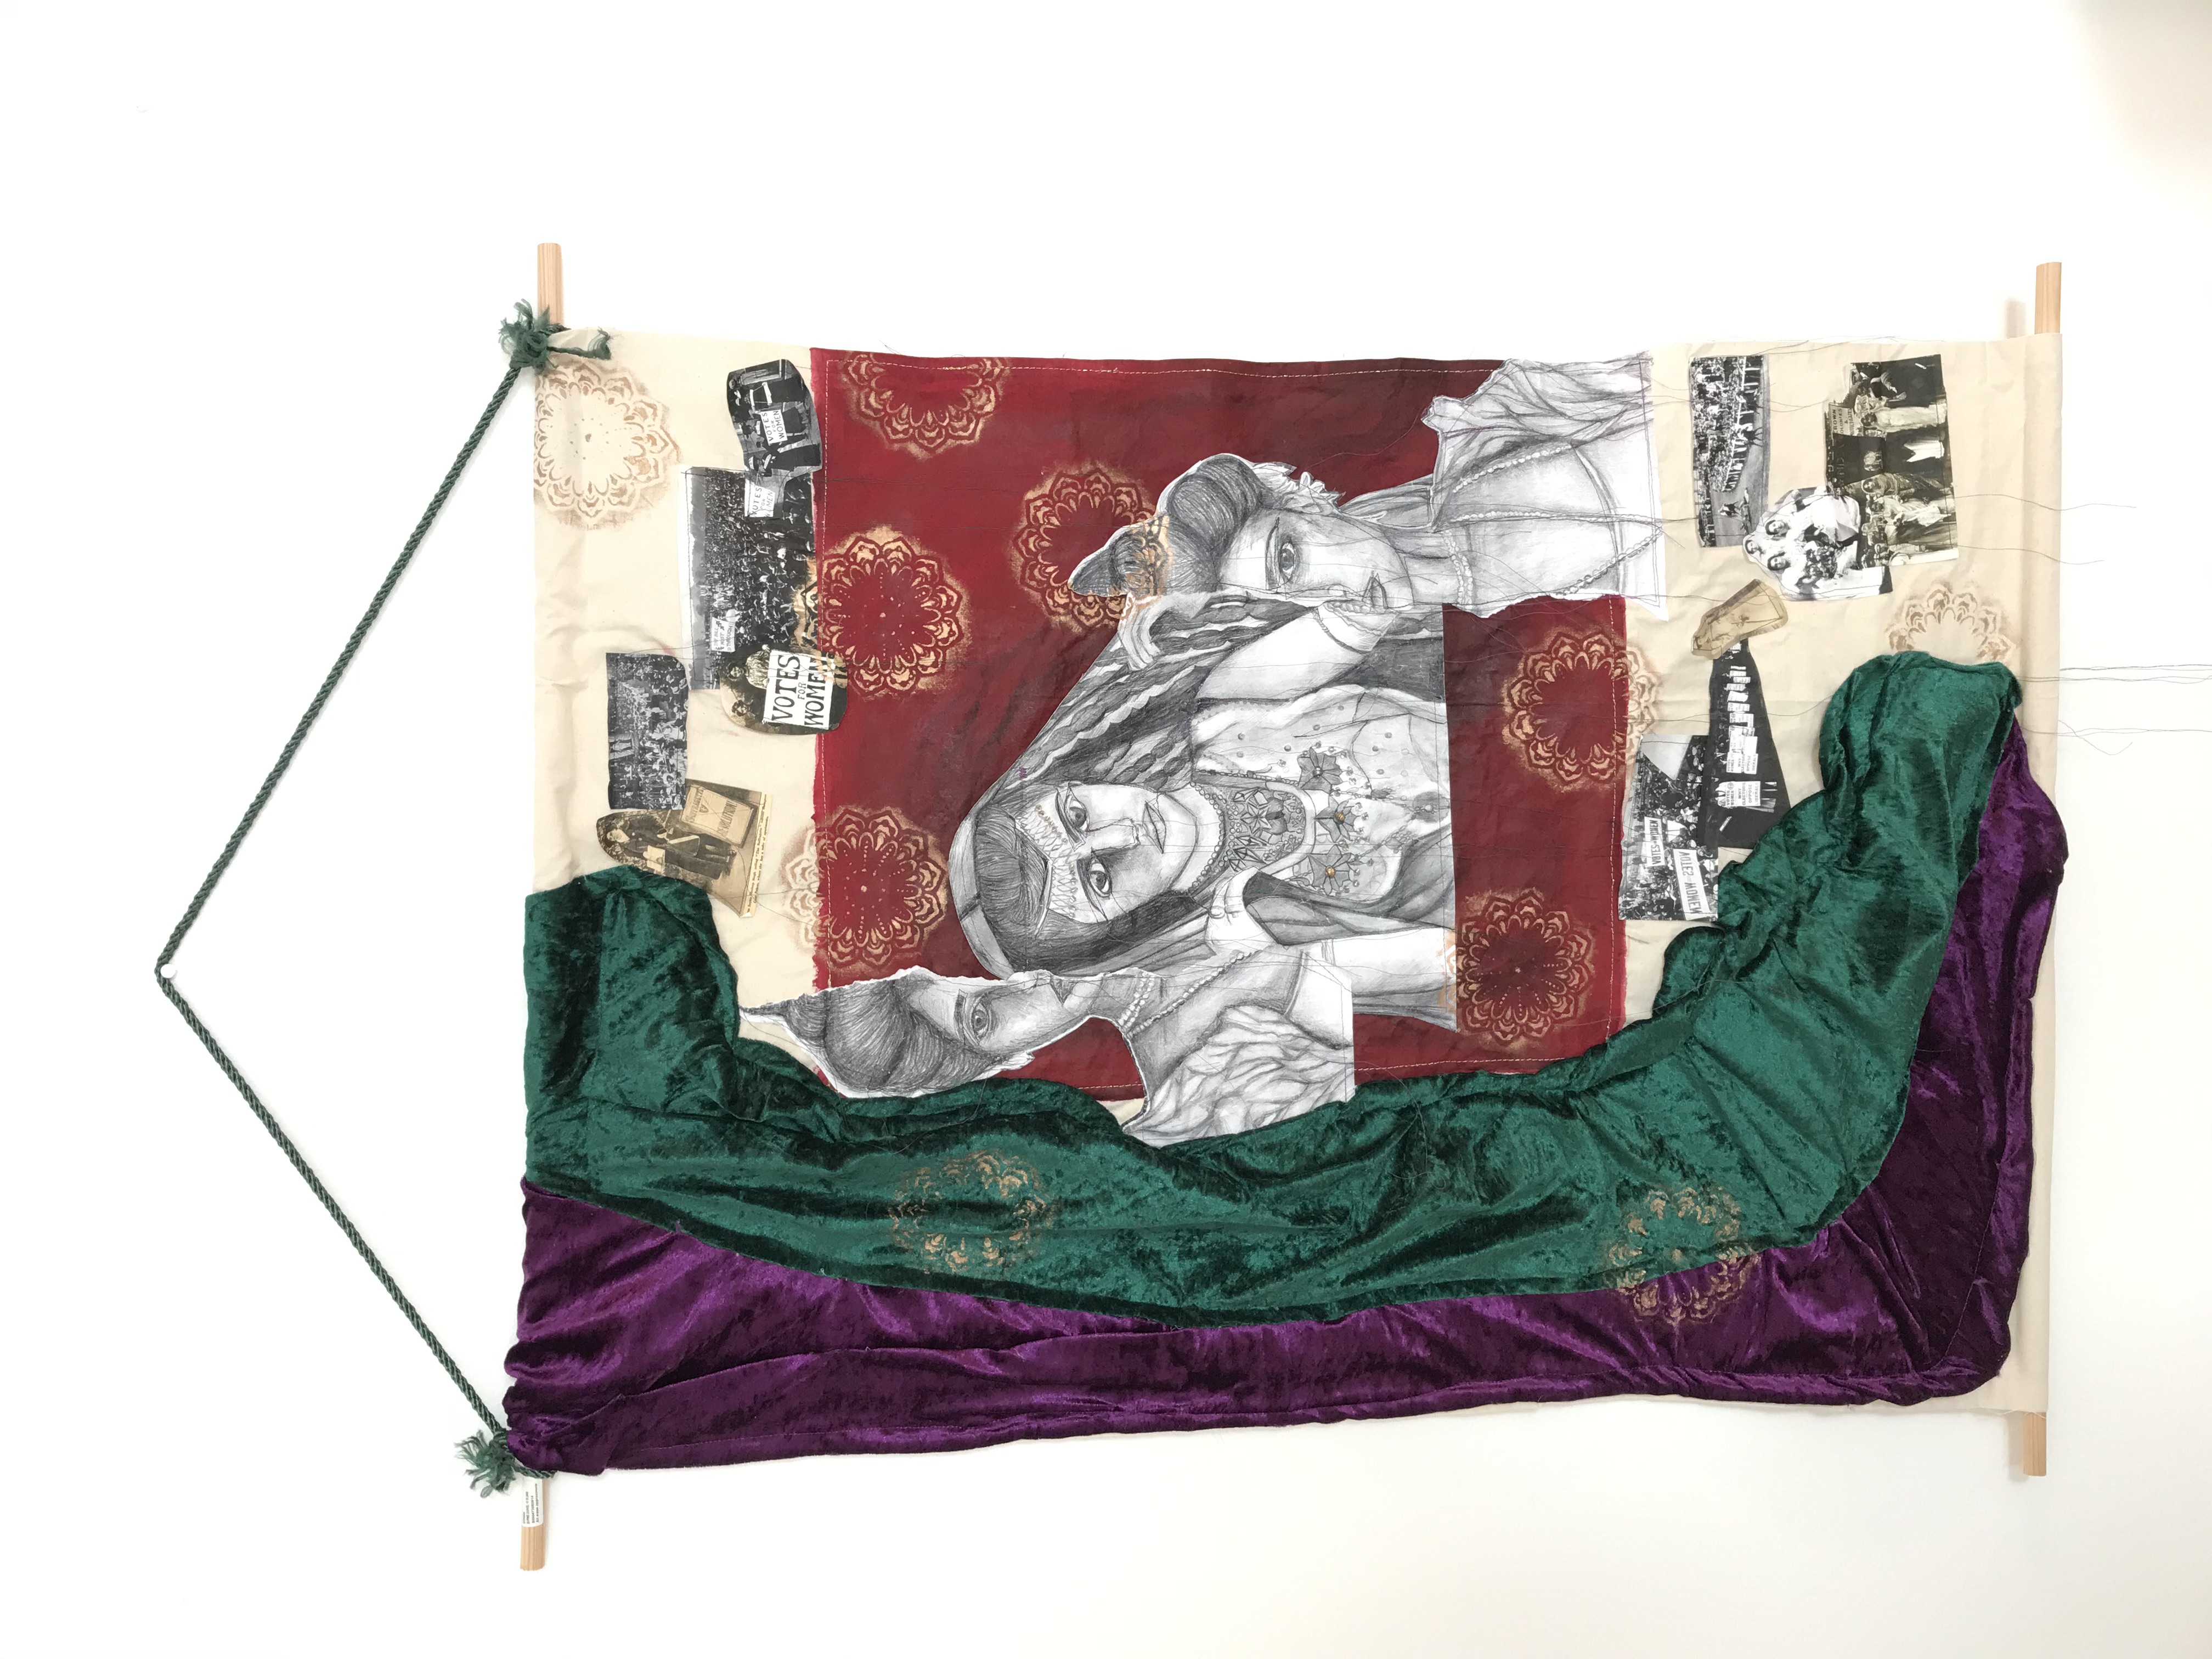 The Suffragette Princess, Displayed on the online exhibition for the  RA Young Artists Summer Show 2021